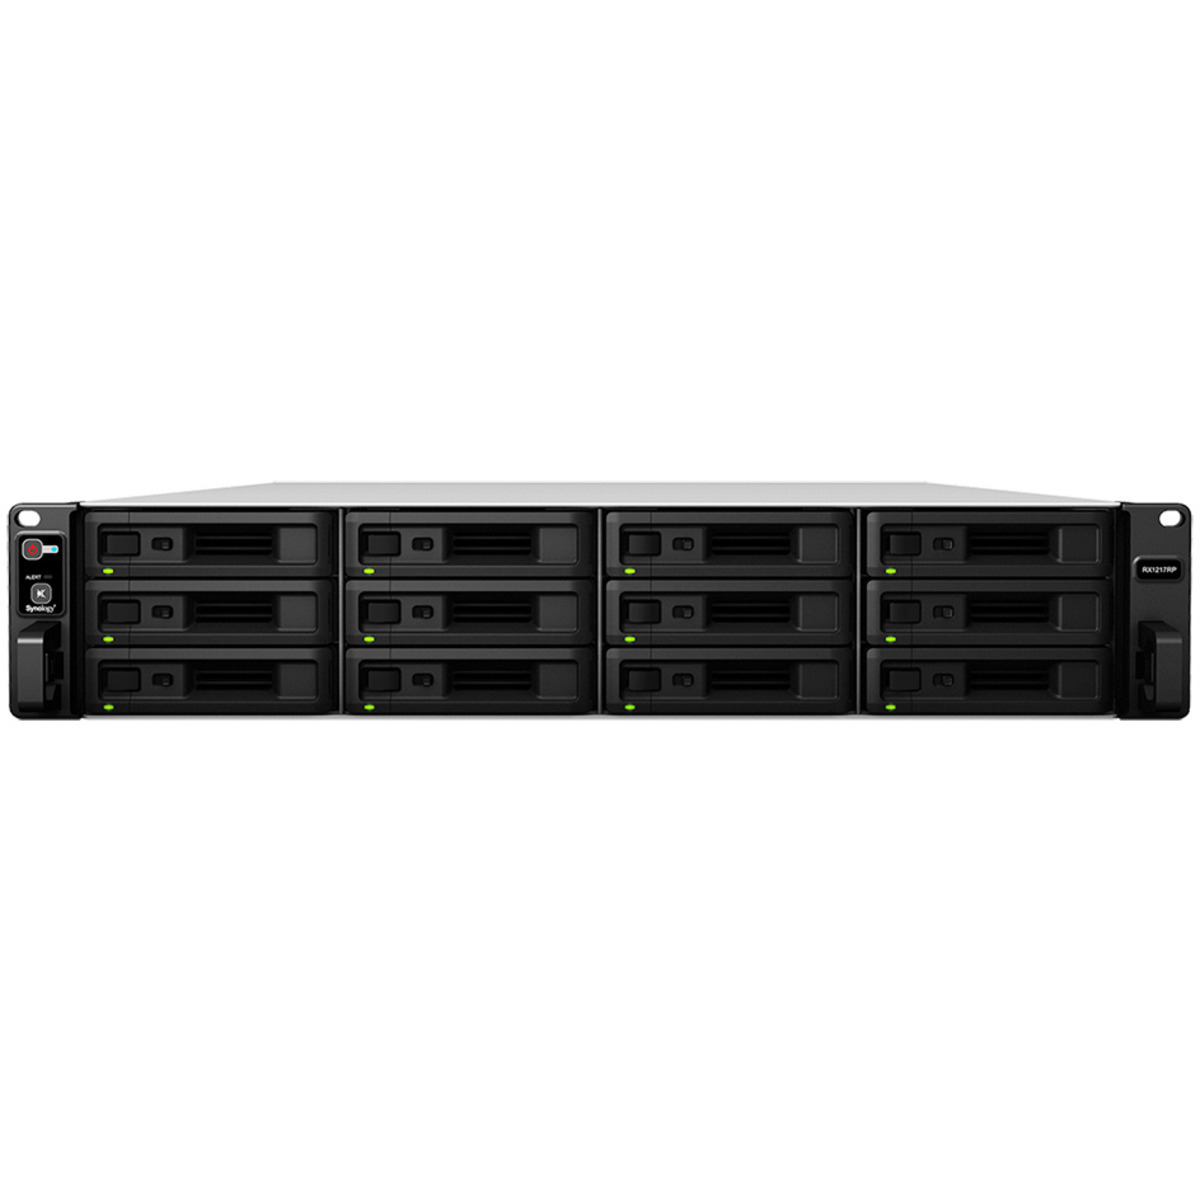 buy $13345 Synology RX1217RP 96tb RackMount Expansion Enclosure 12x8000gb Samsung 870 QVO MZ-77Q8T0 2.5 SATA 6Gb/s SSD CONSUMER Class Drives Installed - Burn-In Tested - nas headquarters buy network attached storage server device das new raid-5 free shipping usa christmas new year holiday sale RX1217RP